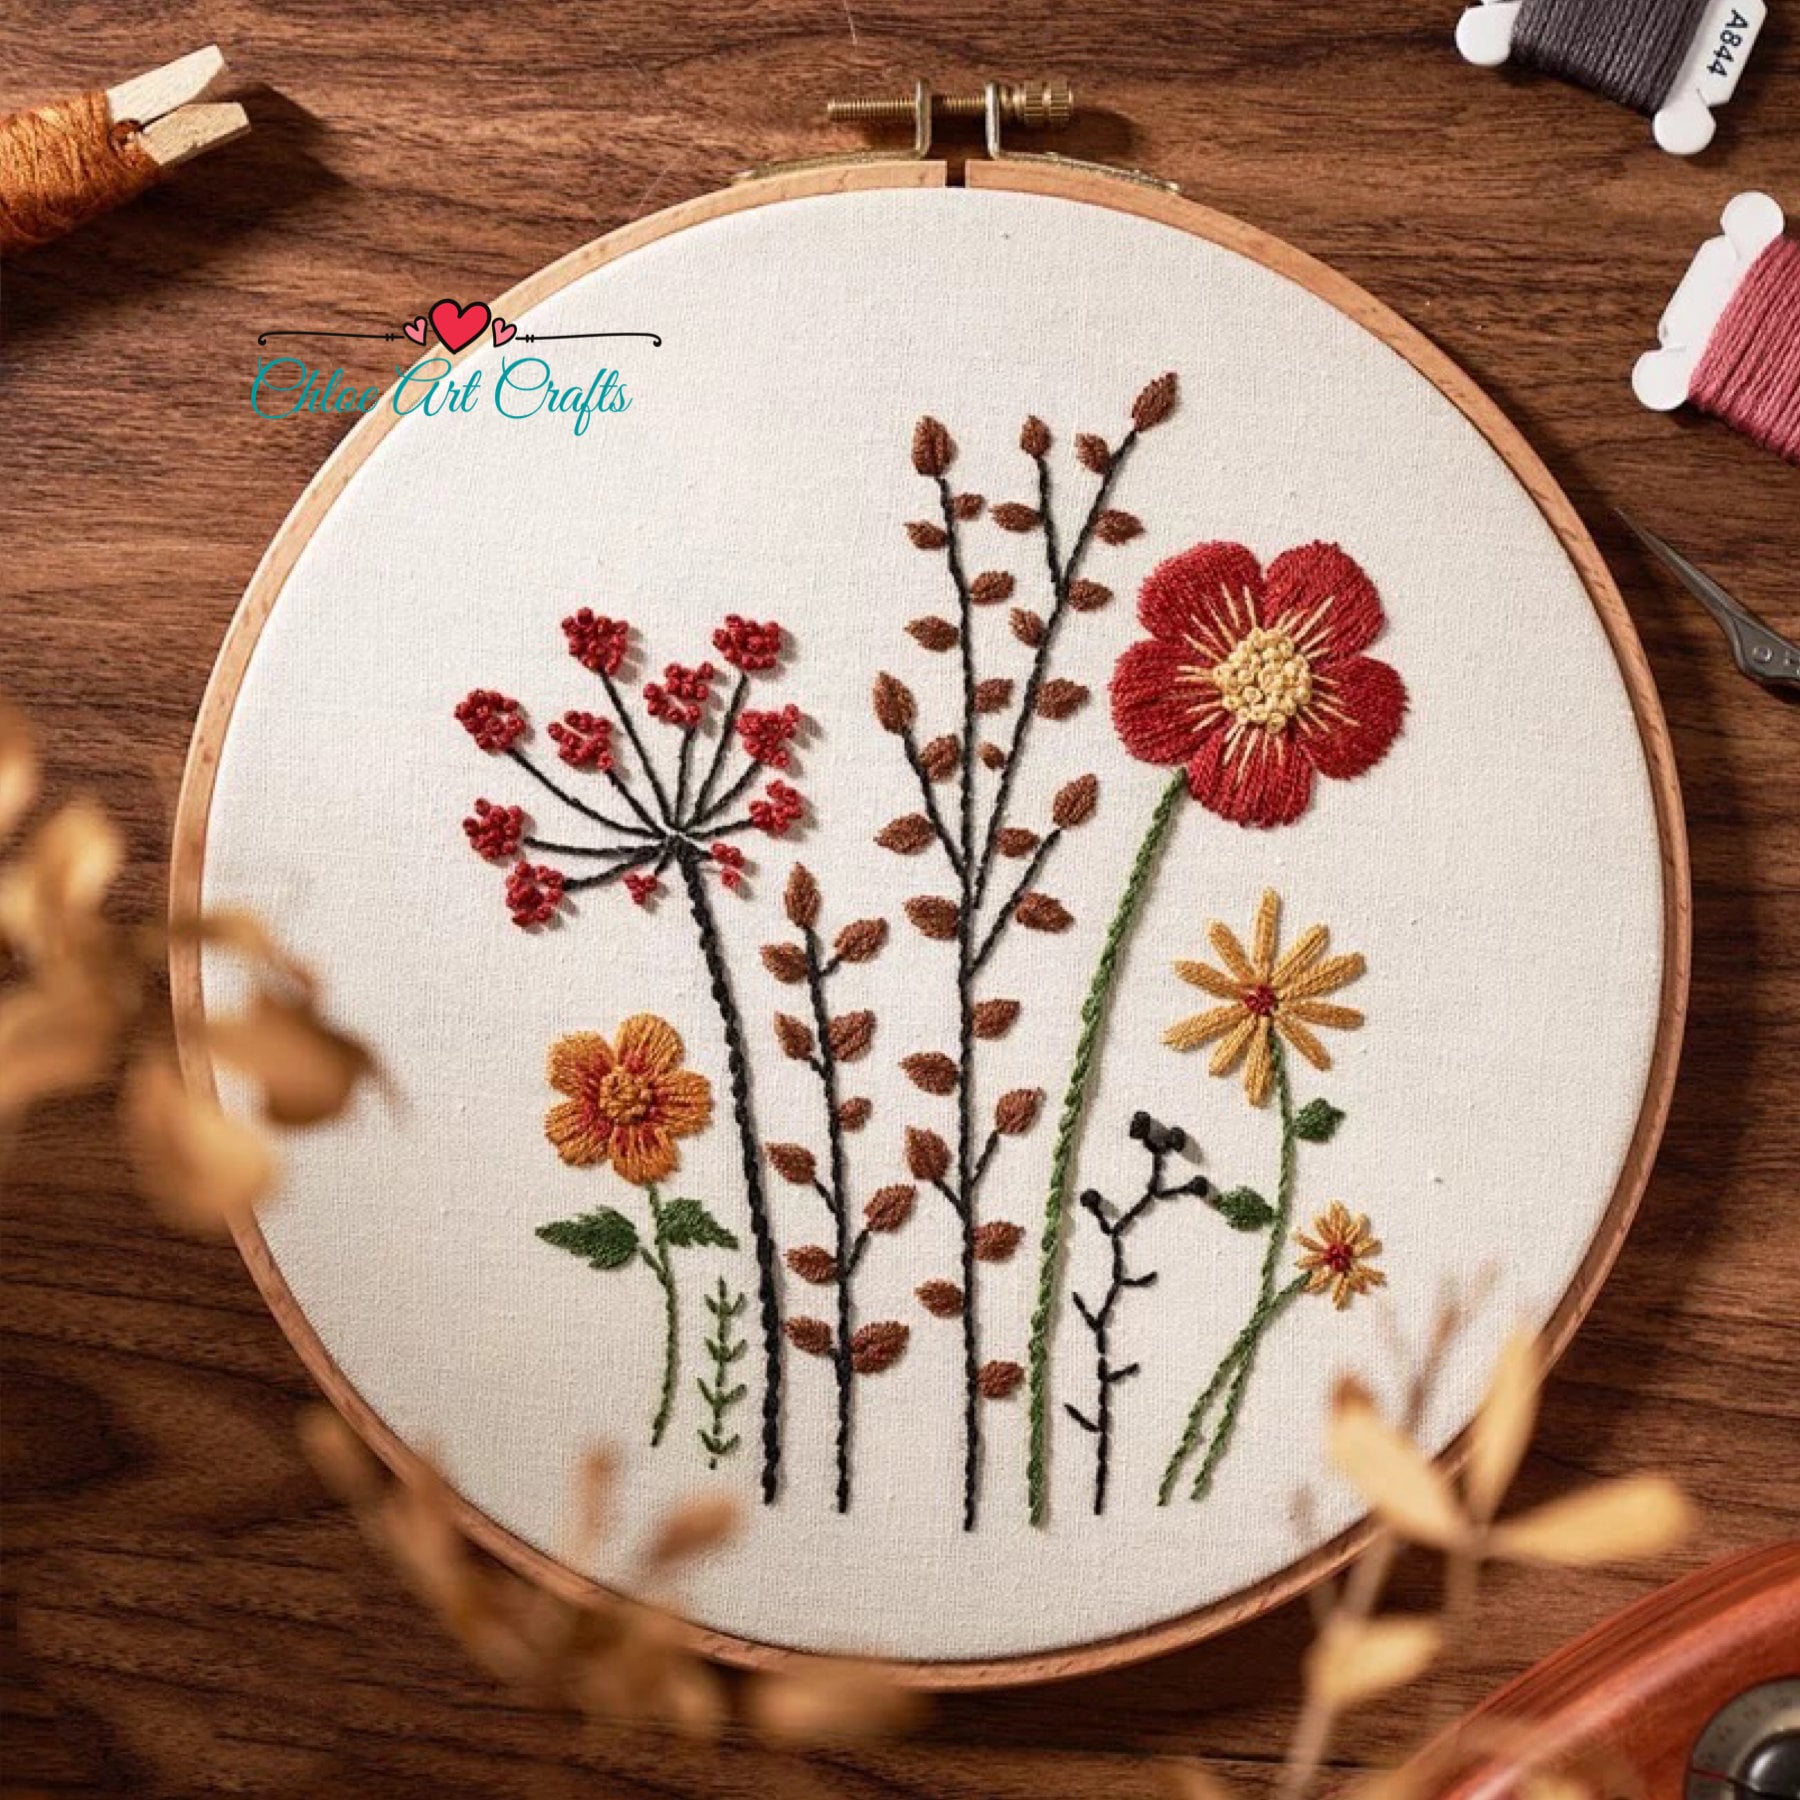 Embroidery Kit for Beginners, DIY Needlepoint Kits with Embroidery Clothes  with Floral Pattern, Embroidery Starter Kit for Adults Kids